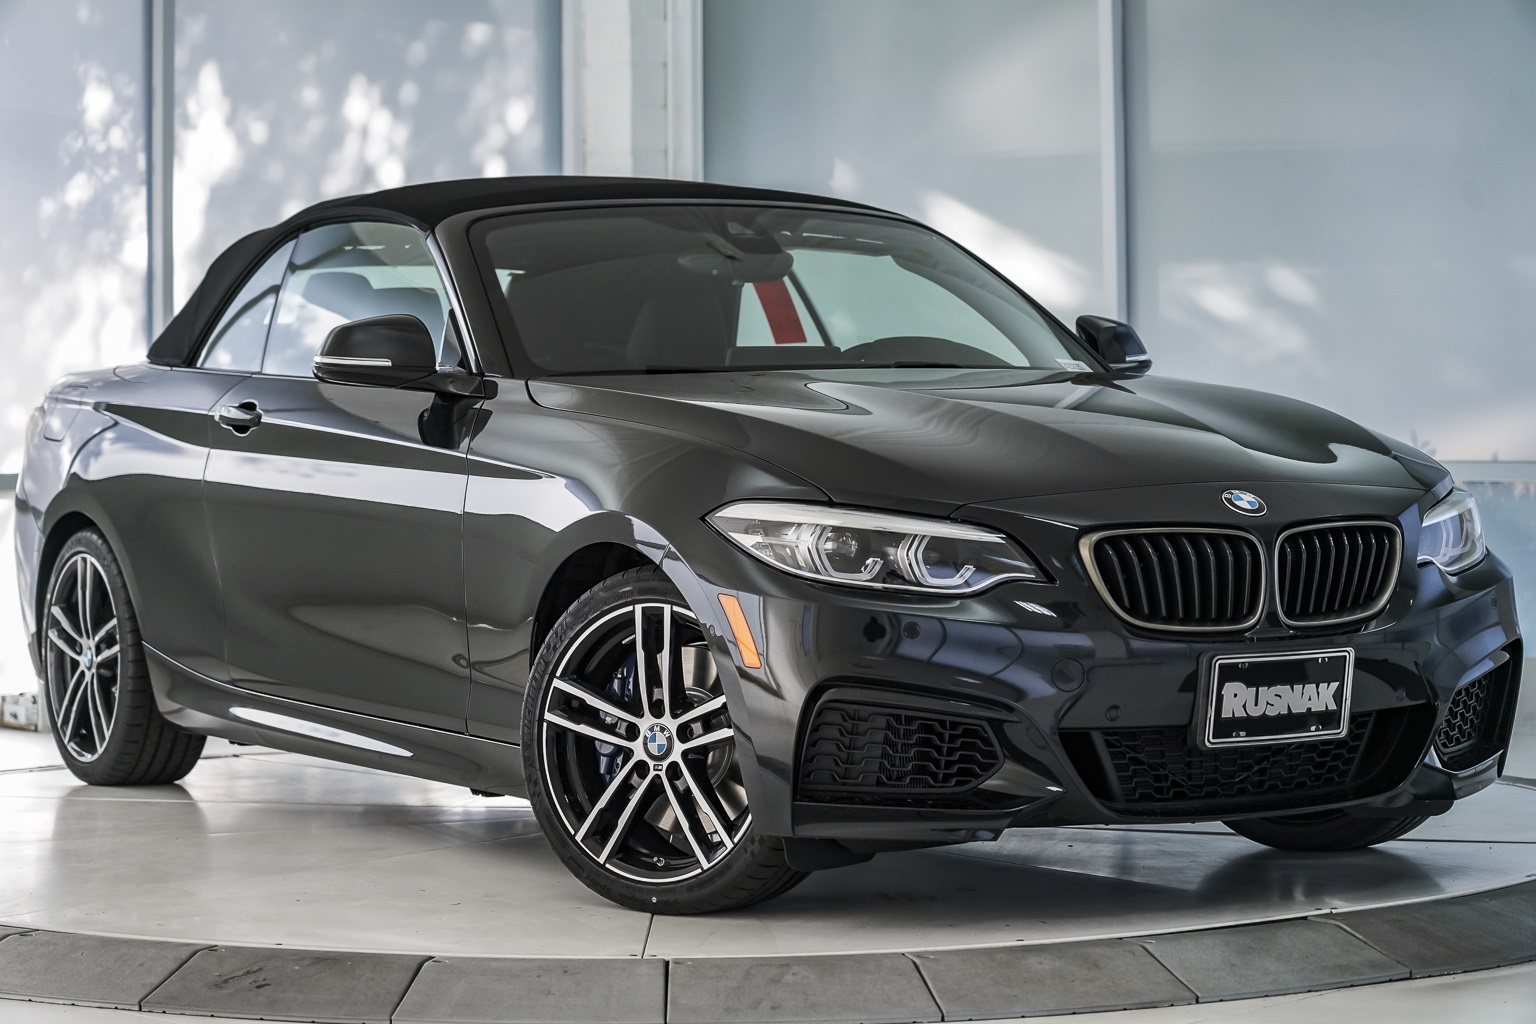 New 2020 Bmw 2 Series M240i 2d Convertible In Thousand Oaks 24200283 3624